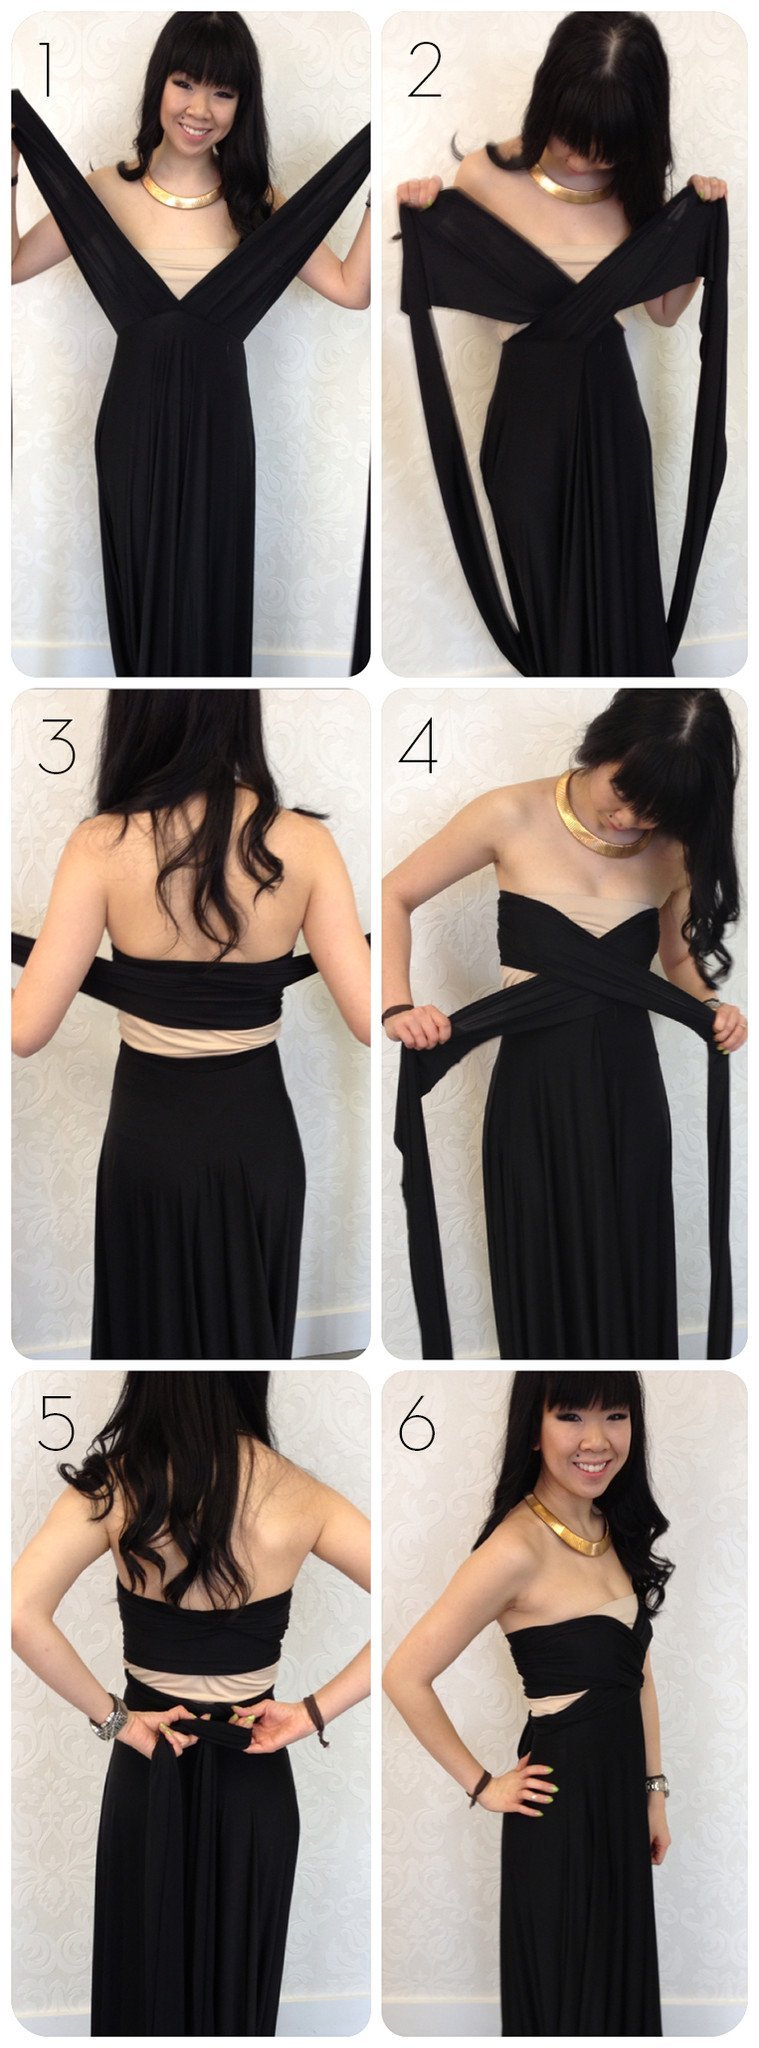 How to Get a Cutout Look with a Convertible Dress – Henkaa